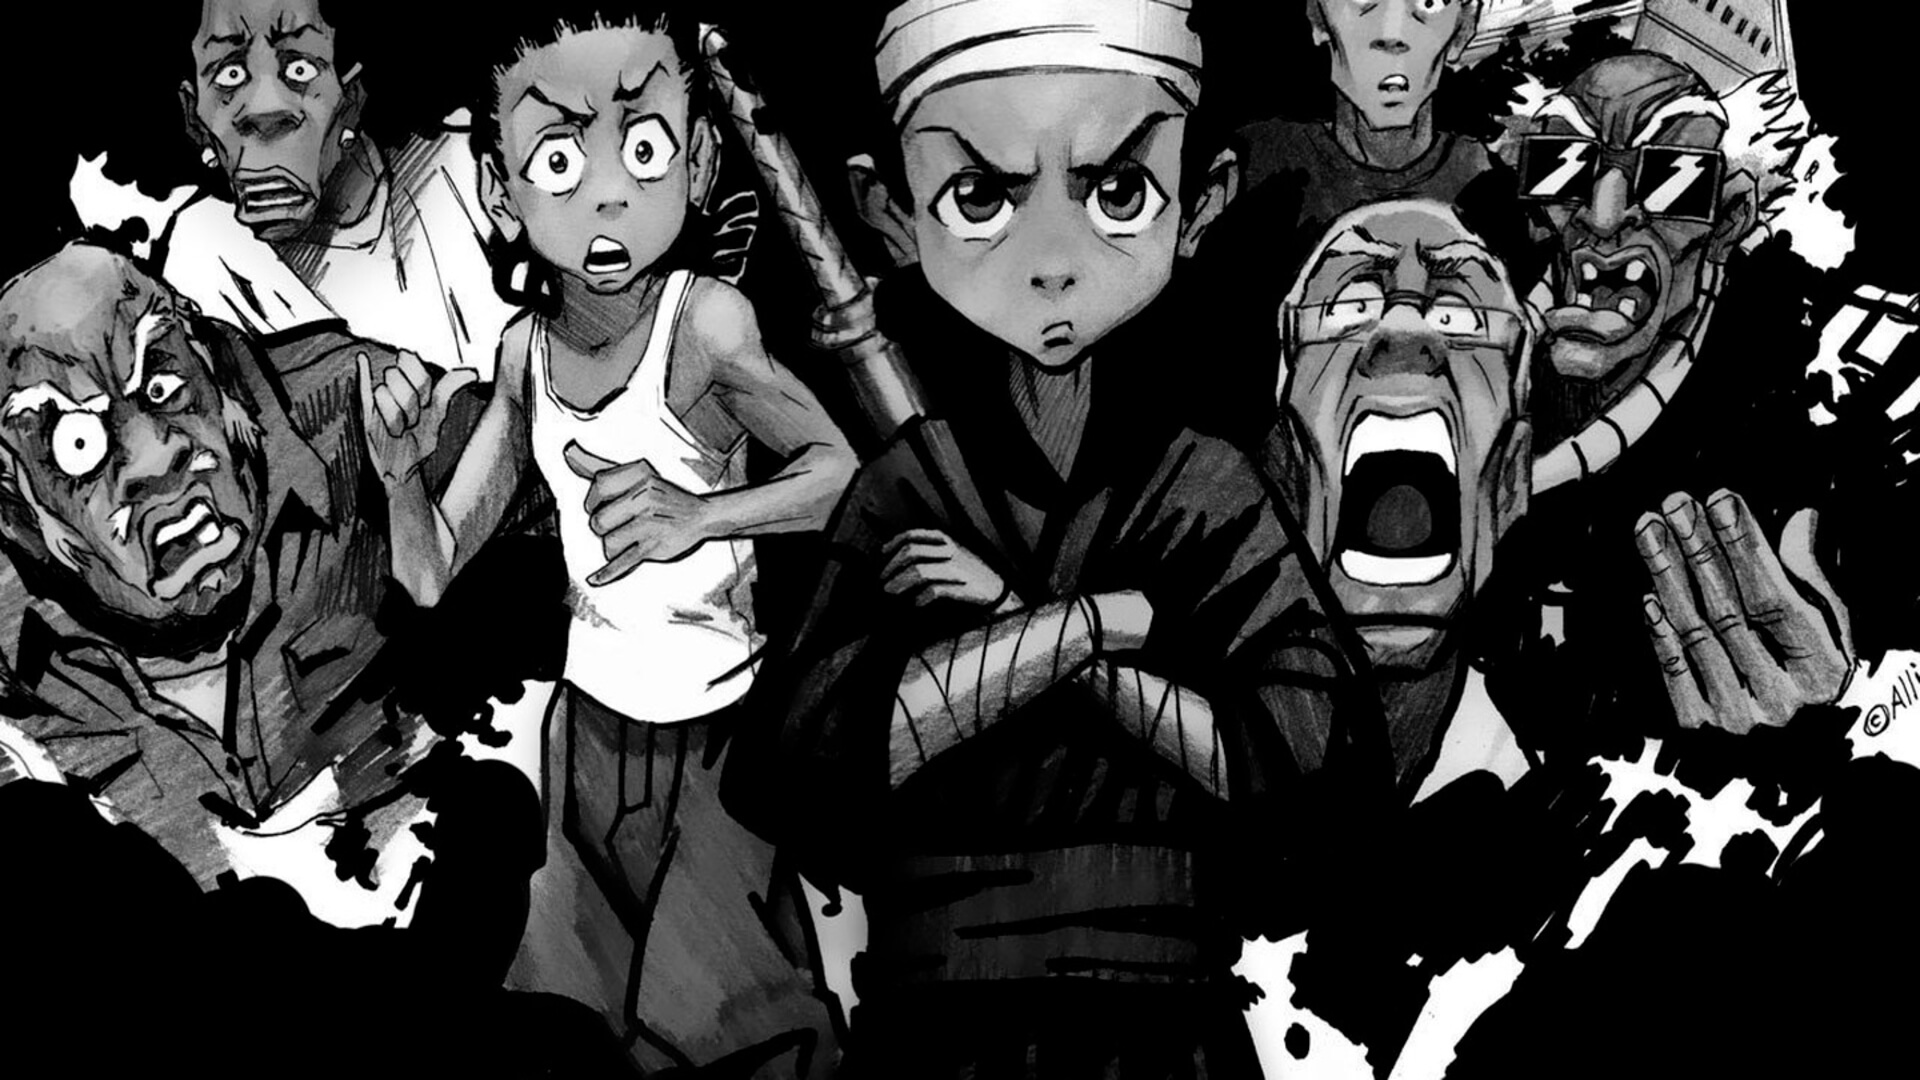 The Boondocks Anime Poster 3Canvas Painting Posters And Prints Wall Art  Pictures for Living Room Bedroom Decor 16x24inch40x60cm  Amazonca Home